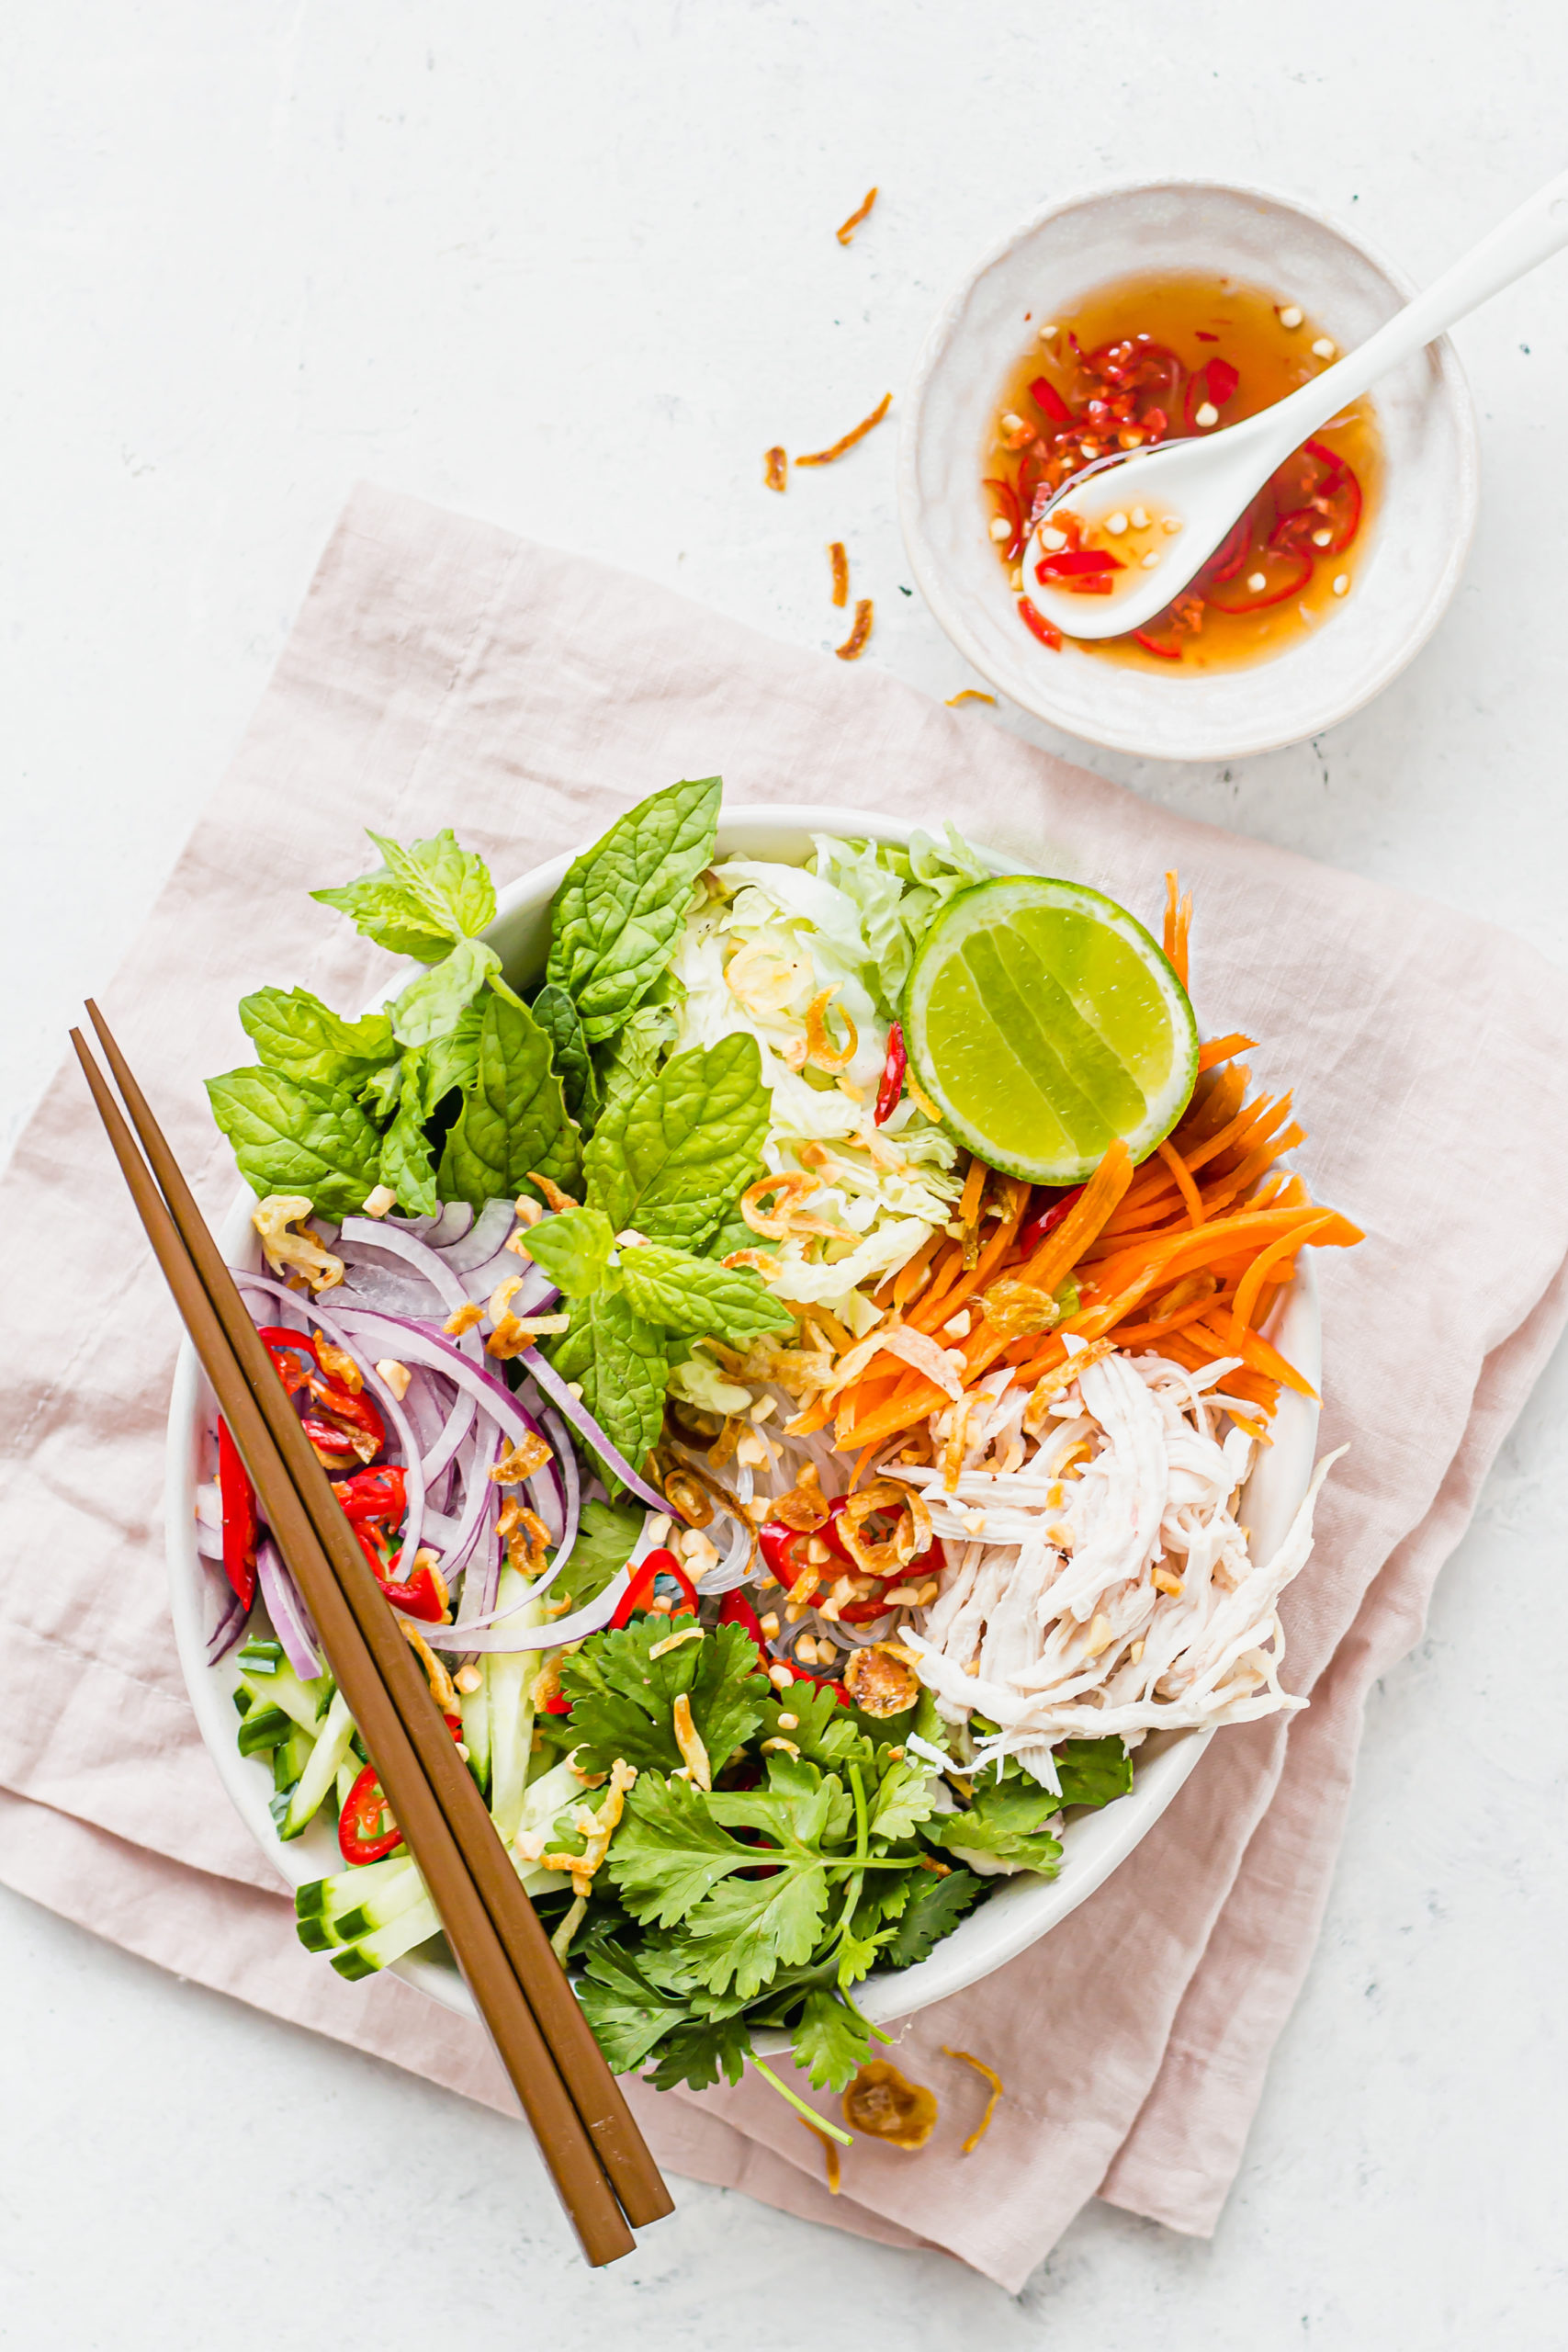 Top view of Vietnamese salad with a side of dressing